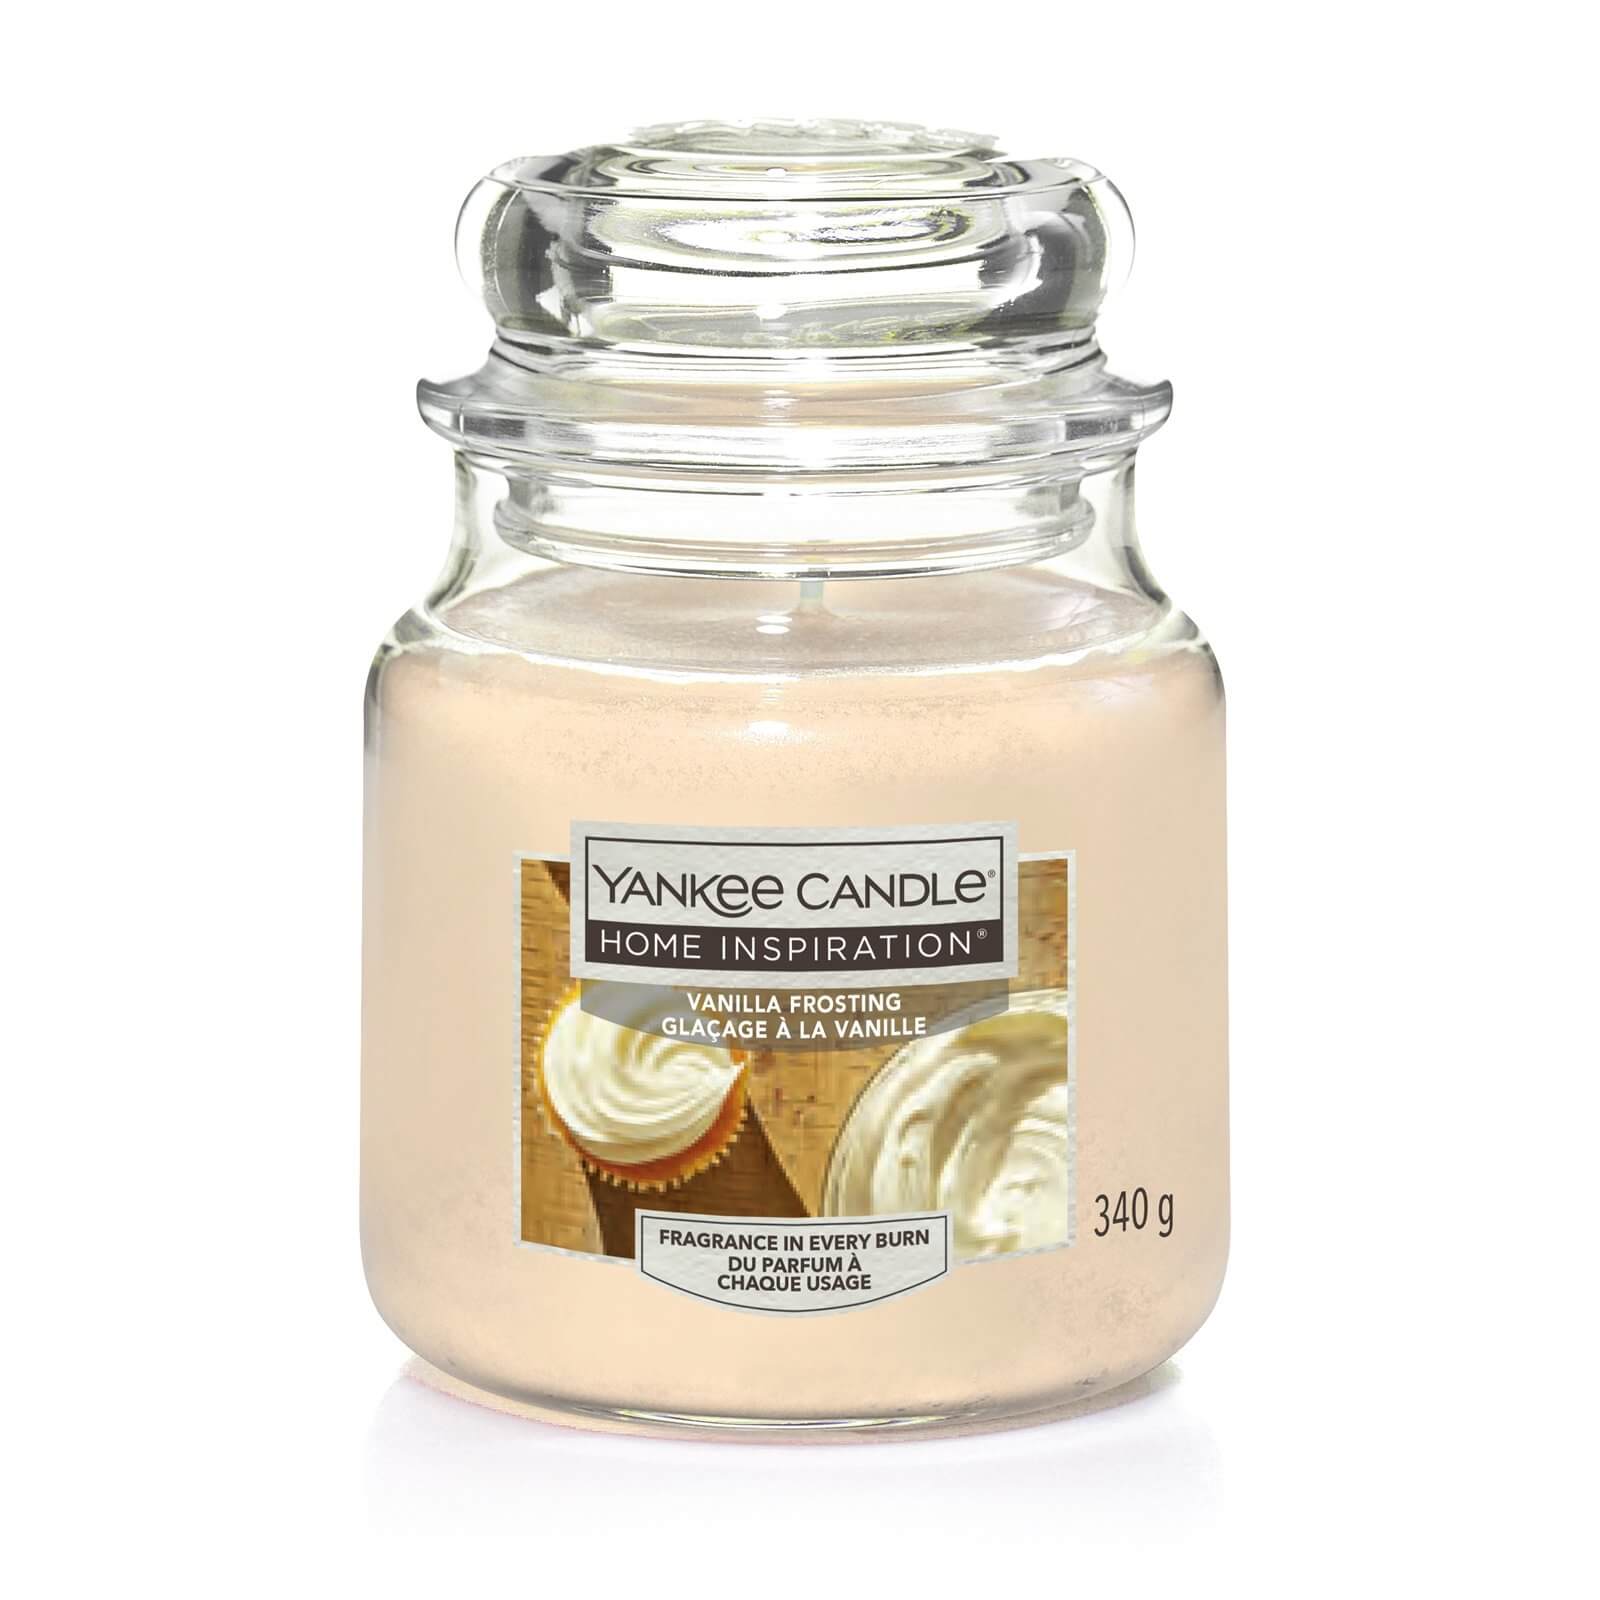 Yankee Candle Home Inspiration Scented Candle - Medium Jar - Vanilla Frosting